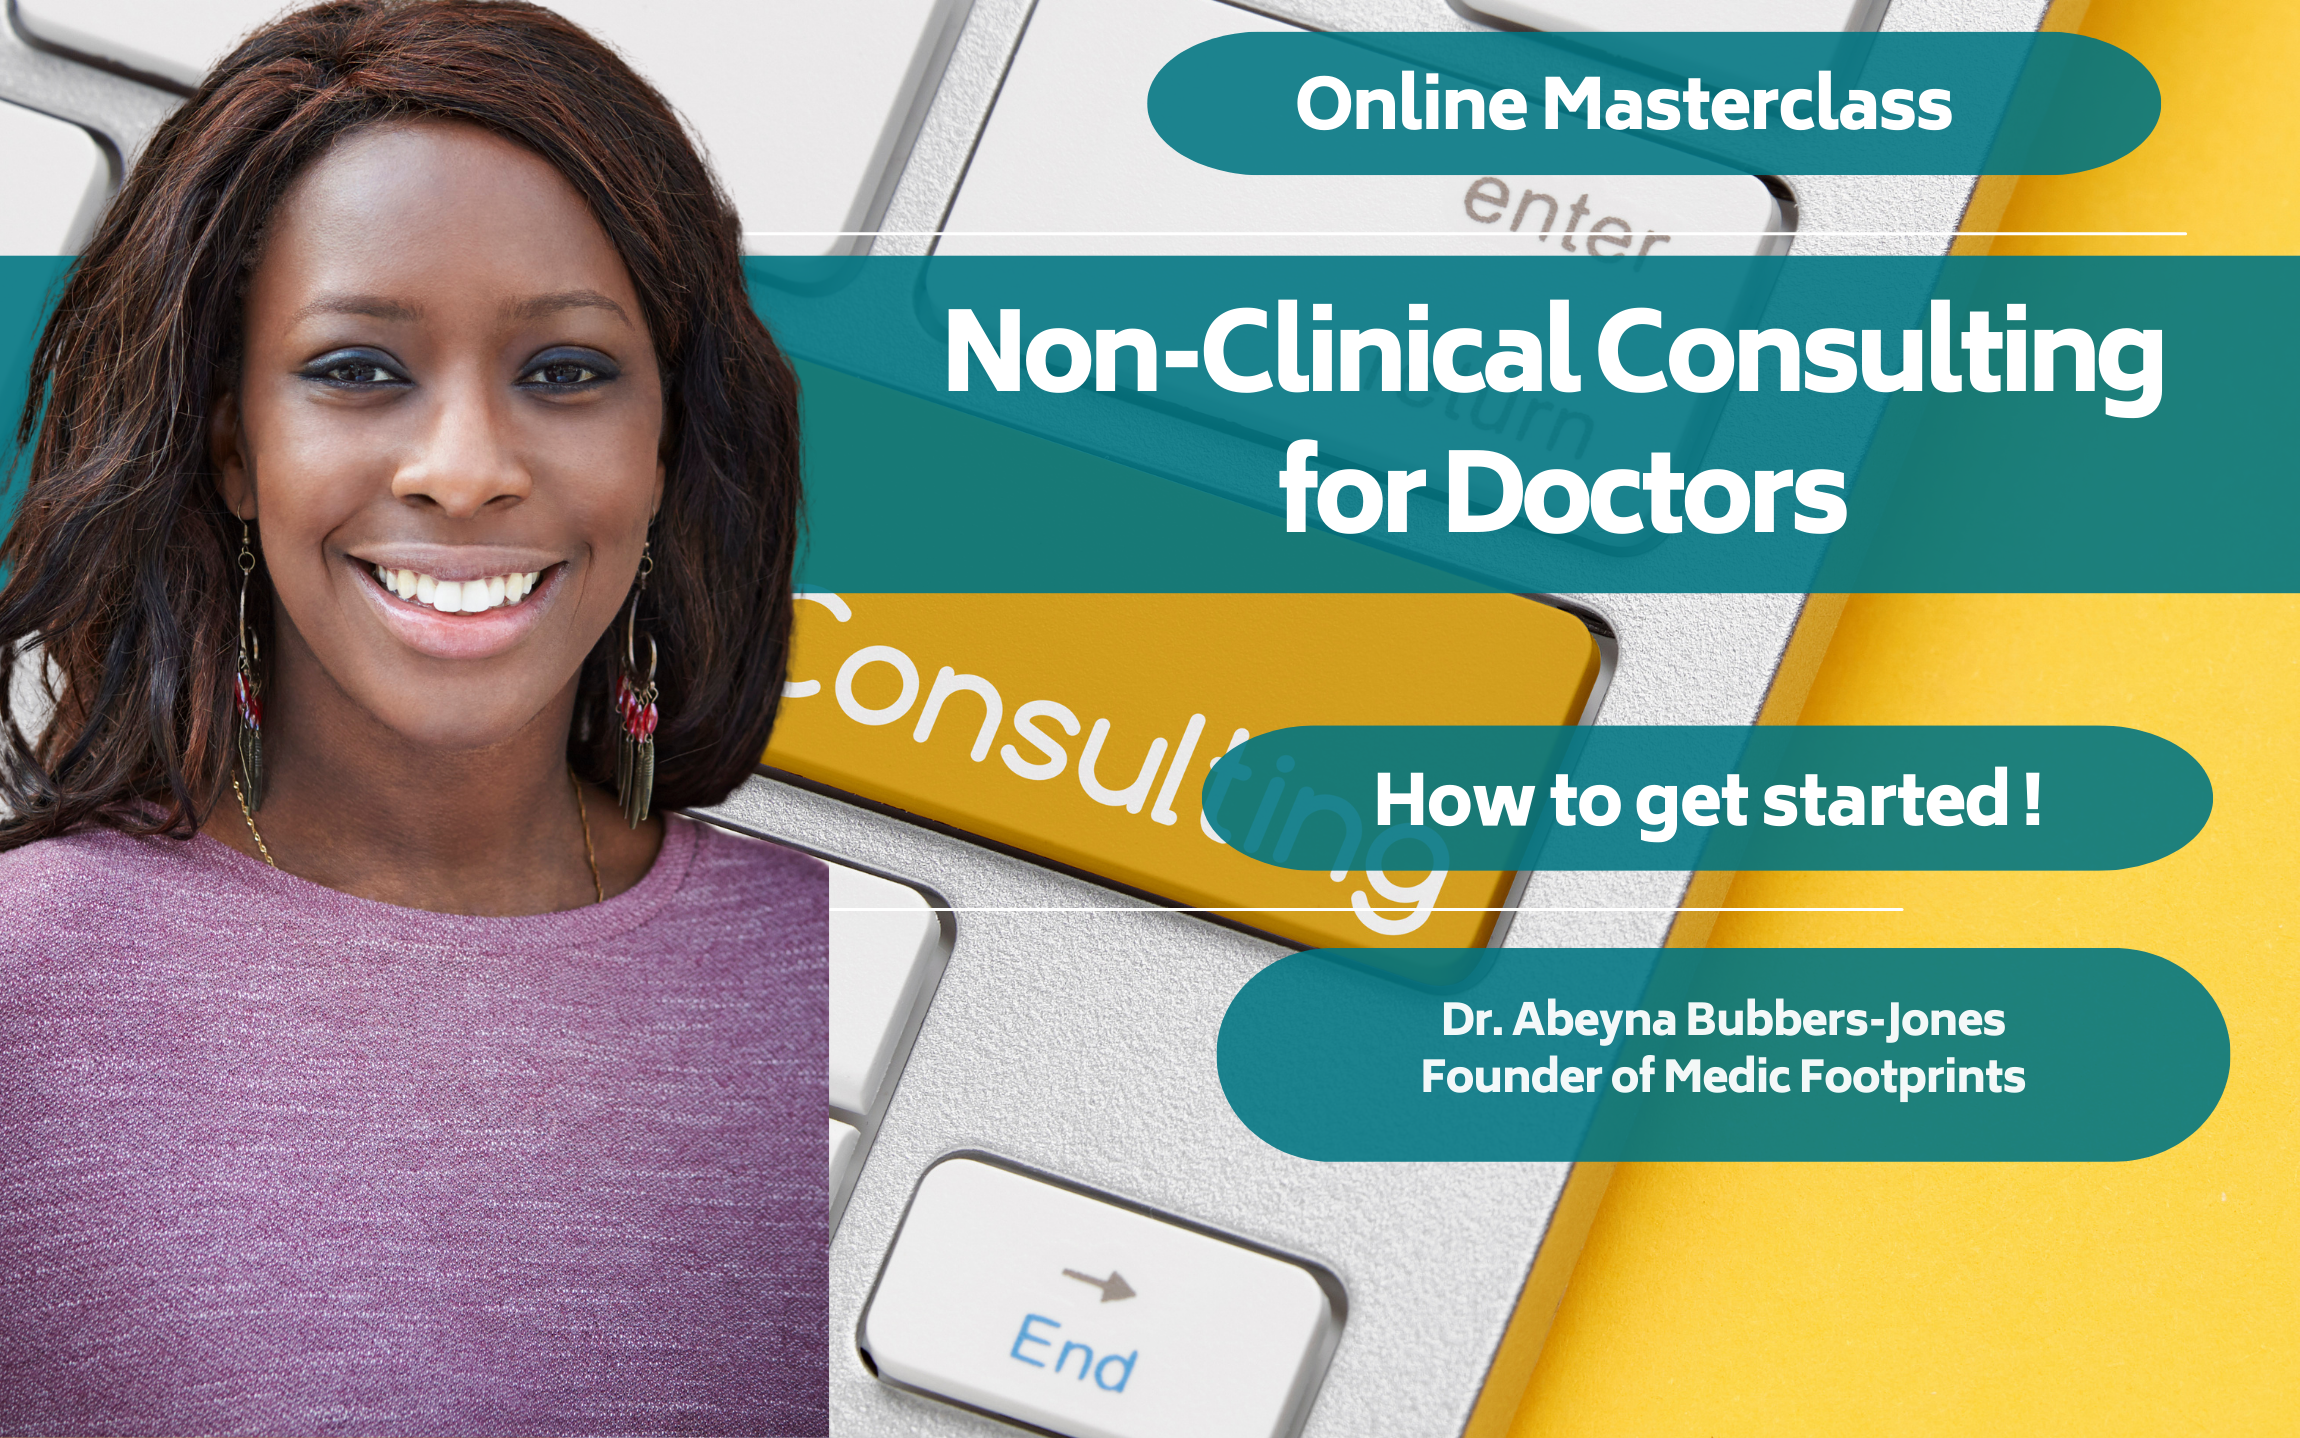 Non-Clinical Consulting for Doctors